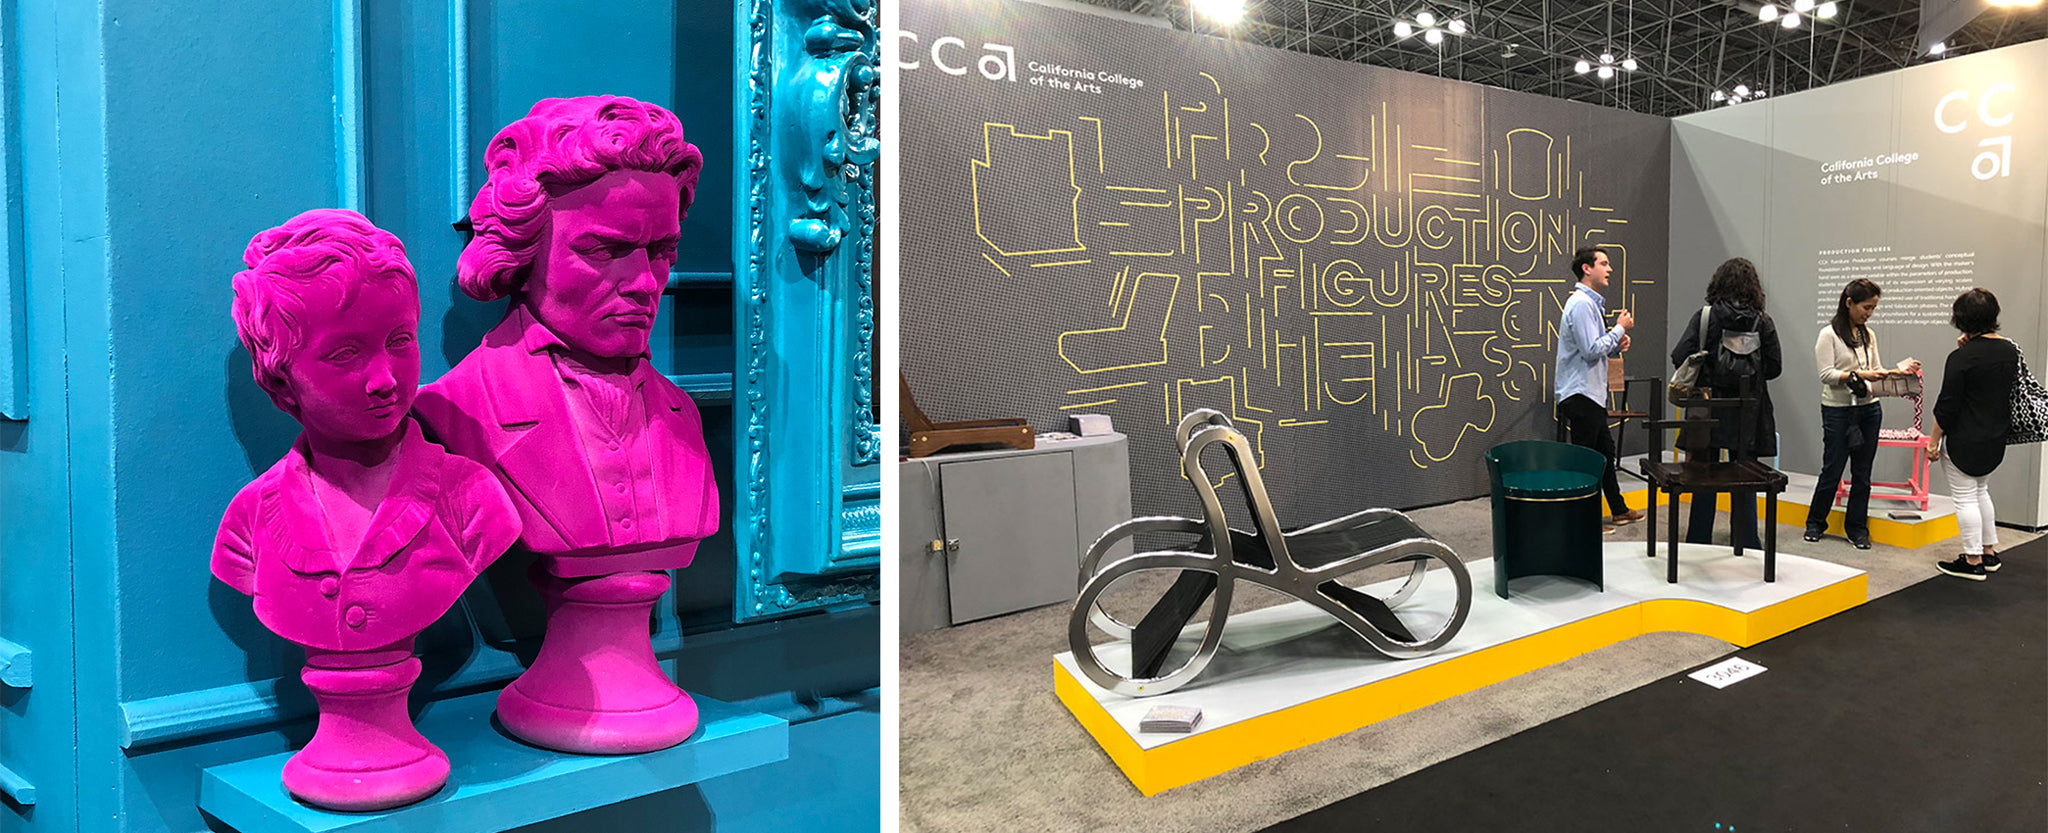 Highlights from ICFF 2018